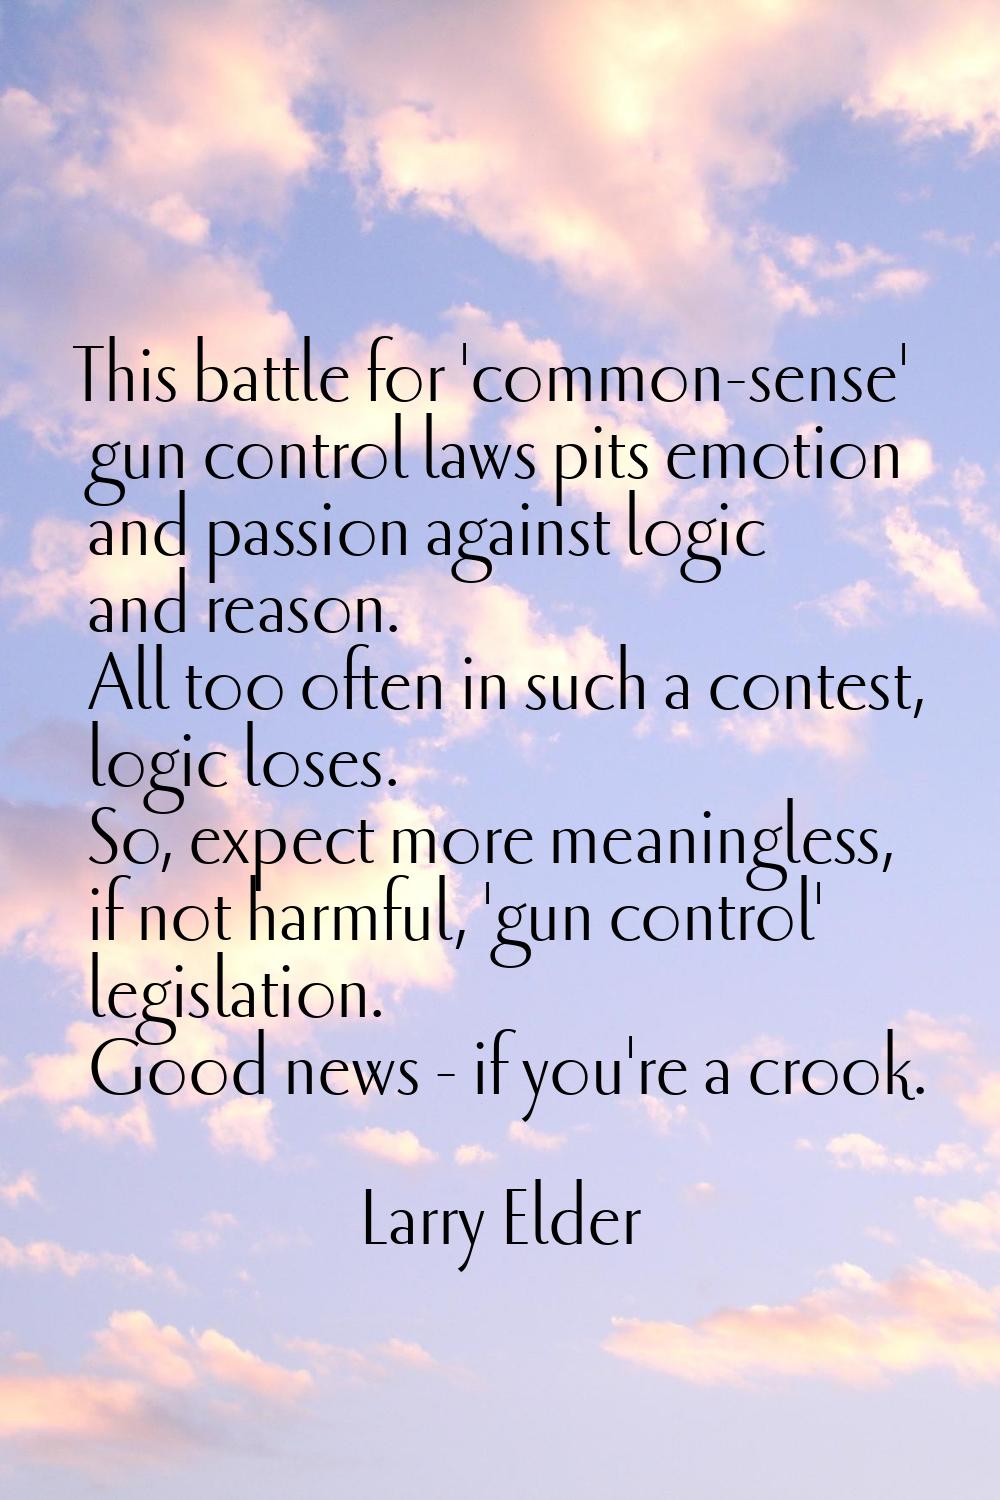 This battle for 'common-sense' gun control laws pits emotion and passion against logic and reason. 